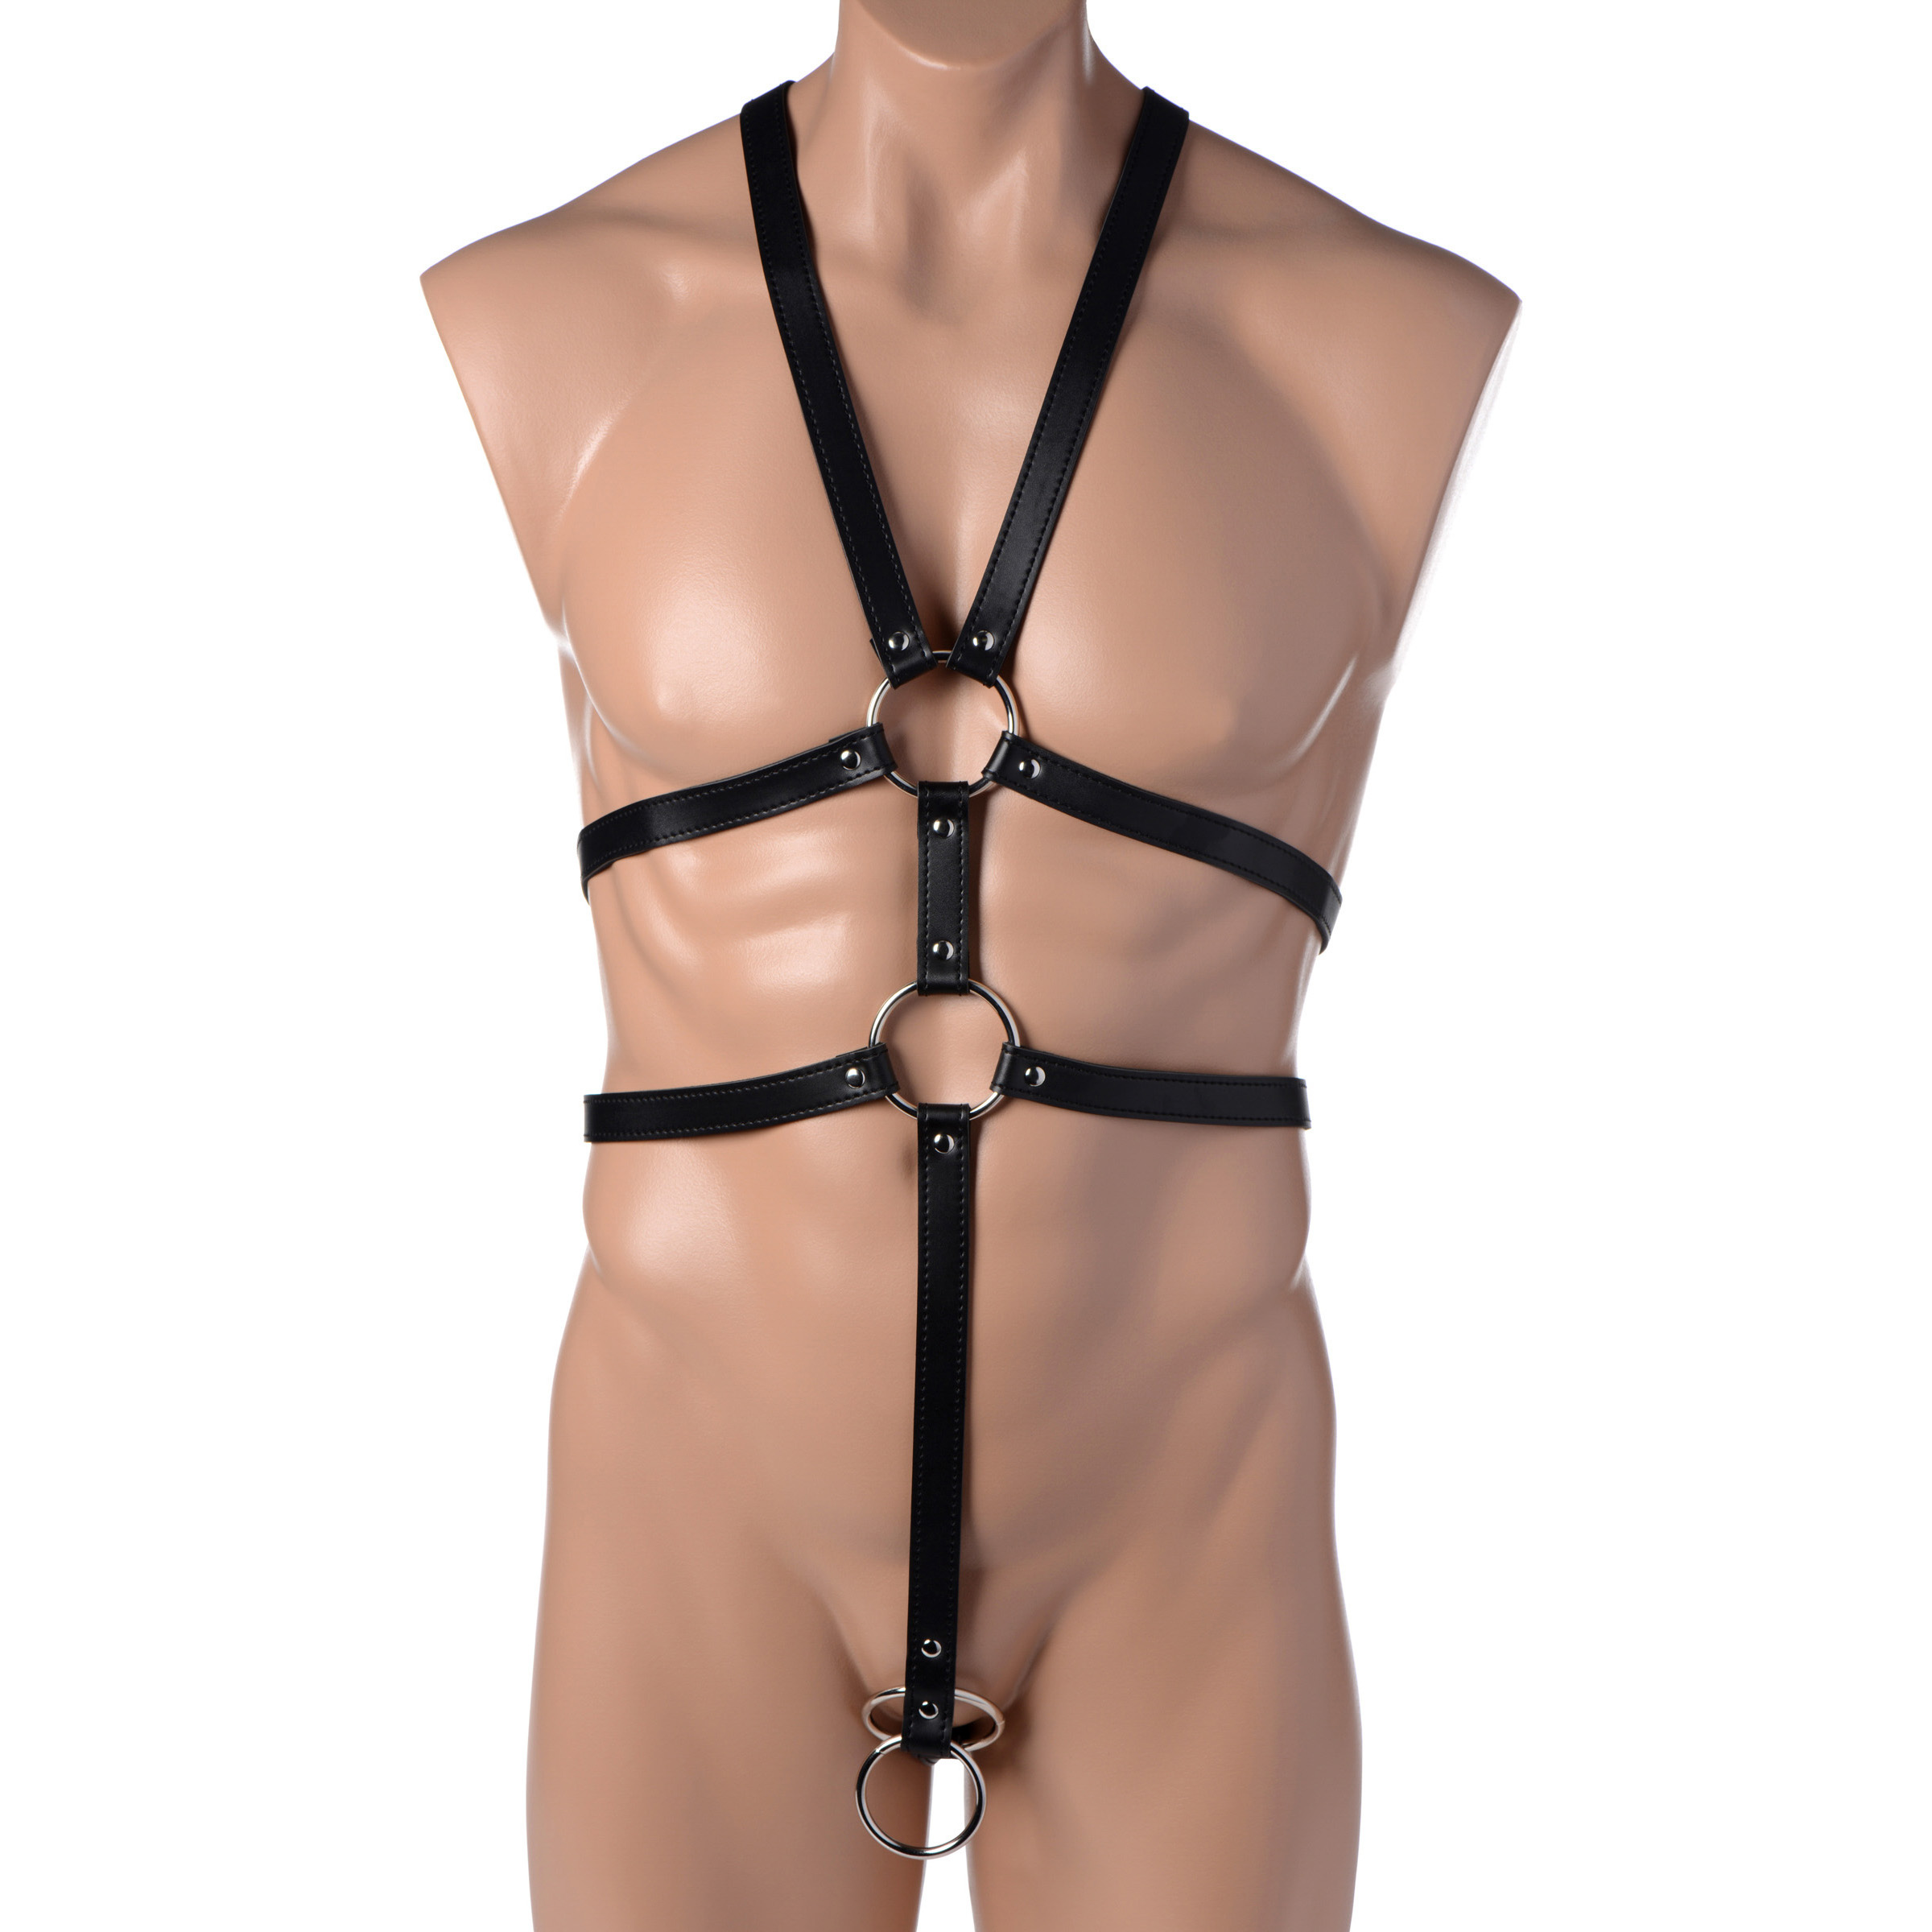 Male+Full+Body+Faux+Leather+Harness